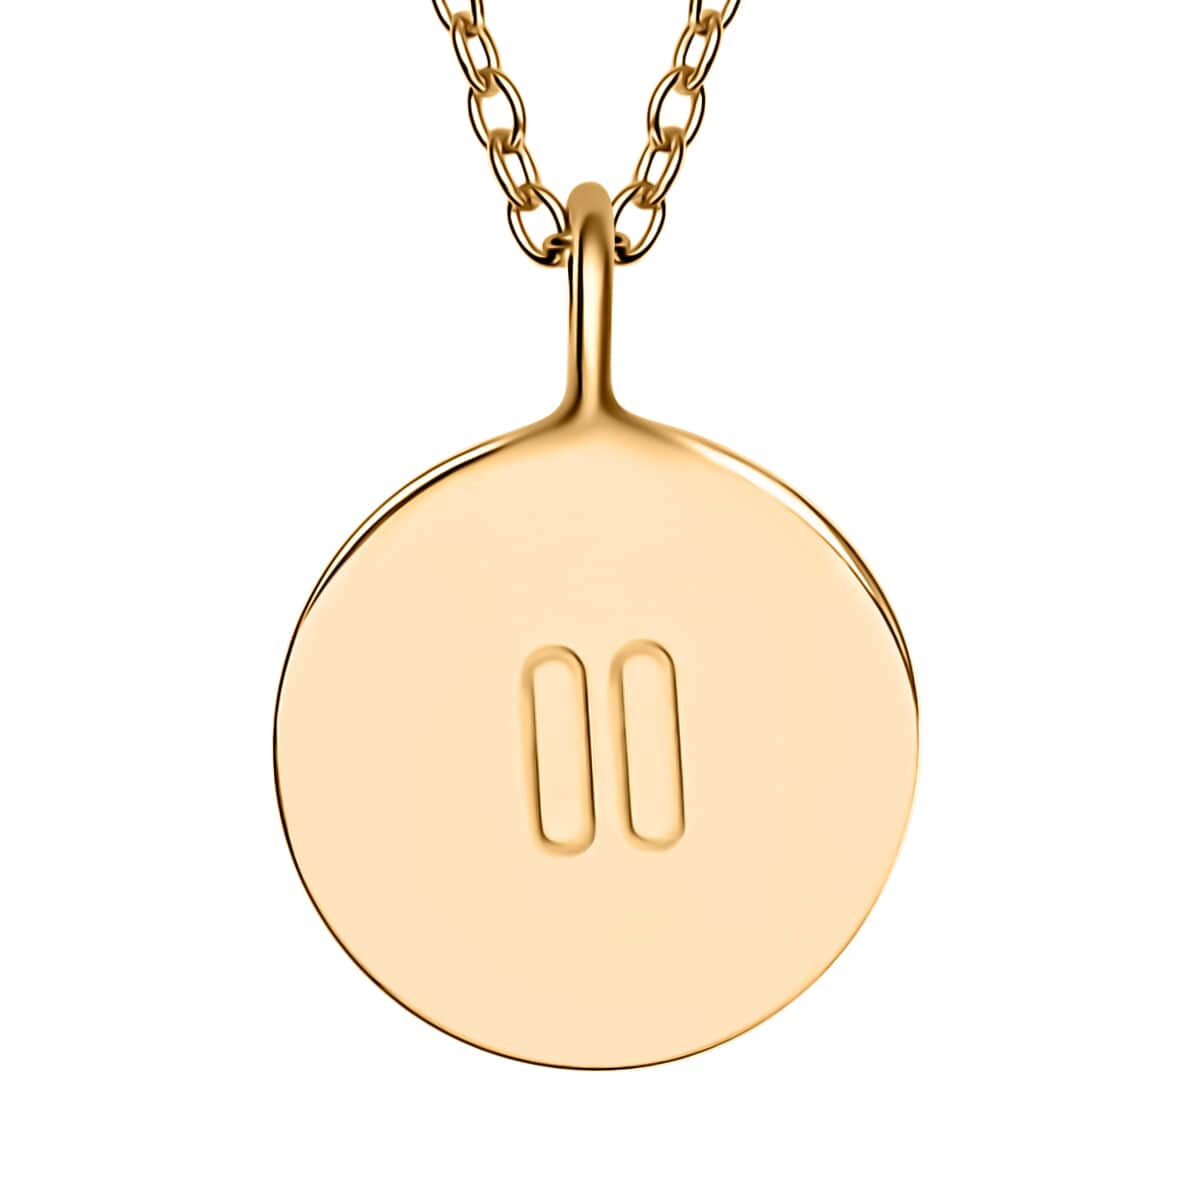 Dainty Pause Sign Pendant Necklace, 16-18 Inch Adjustable Necklace, 14K Yellow Gold Over Sterling Silver Pendant Necklace 3.90 Grams image number 2